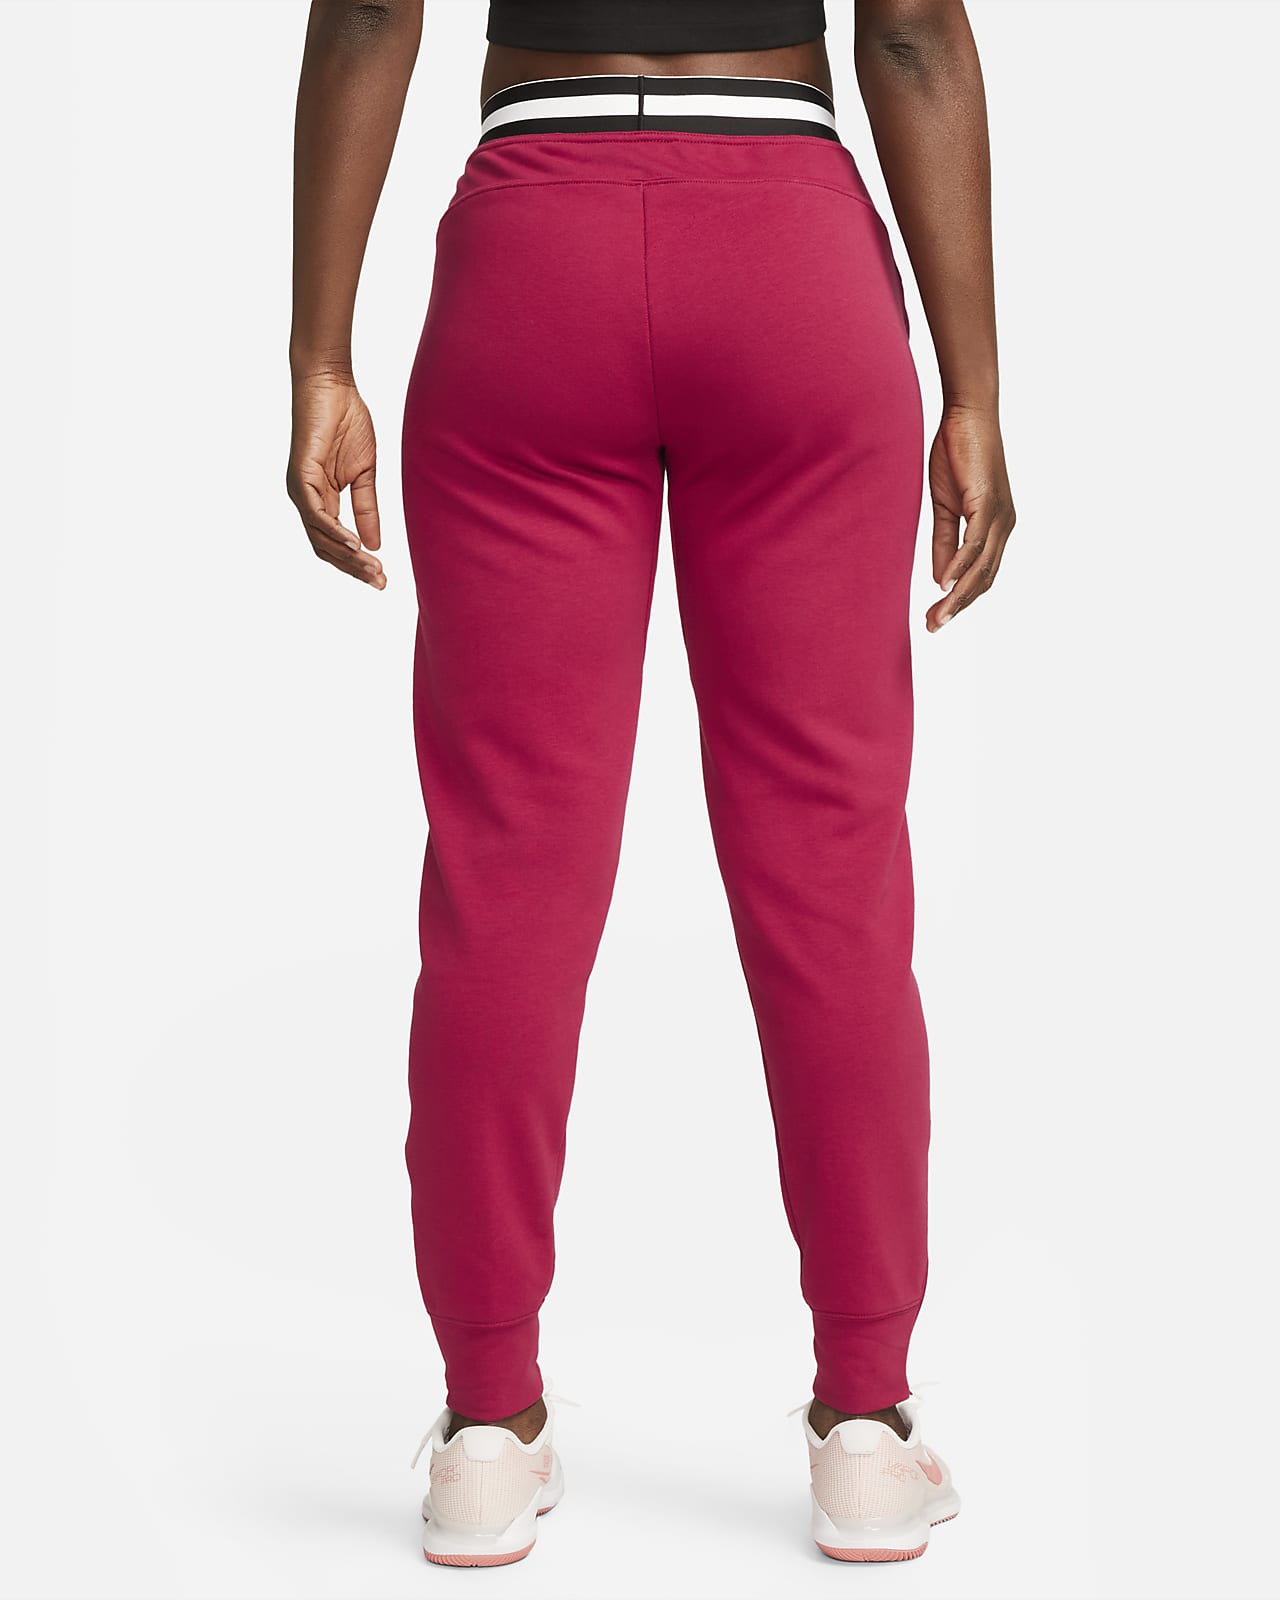 NikeCourt Dri-FIT Heritage Women's French Terry Tennis Trousers